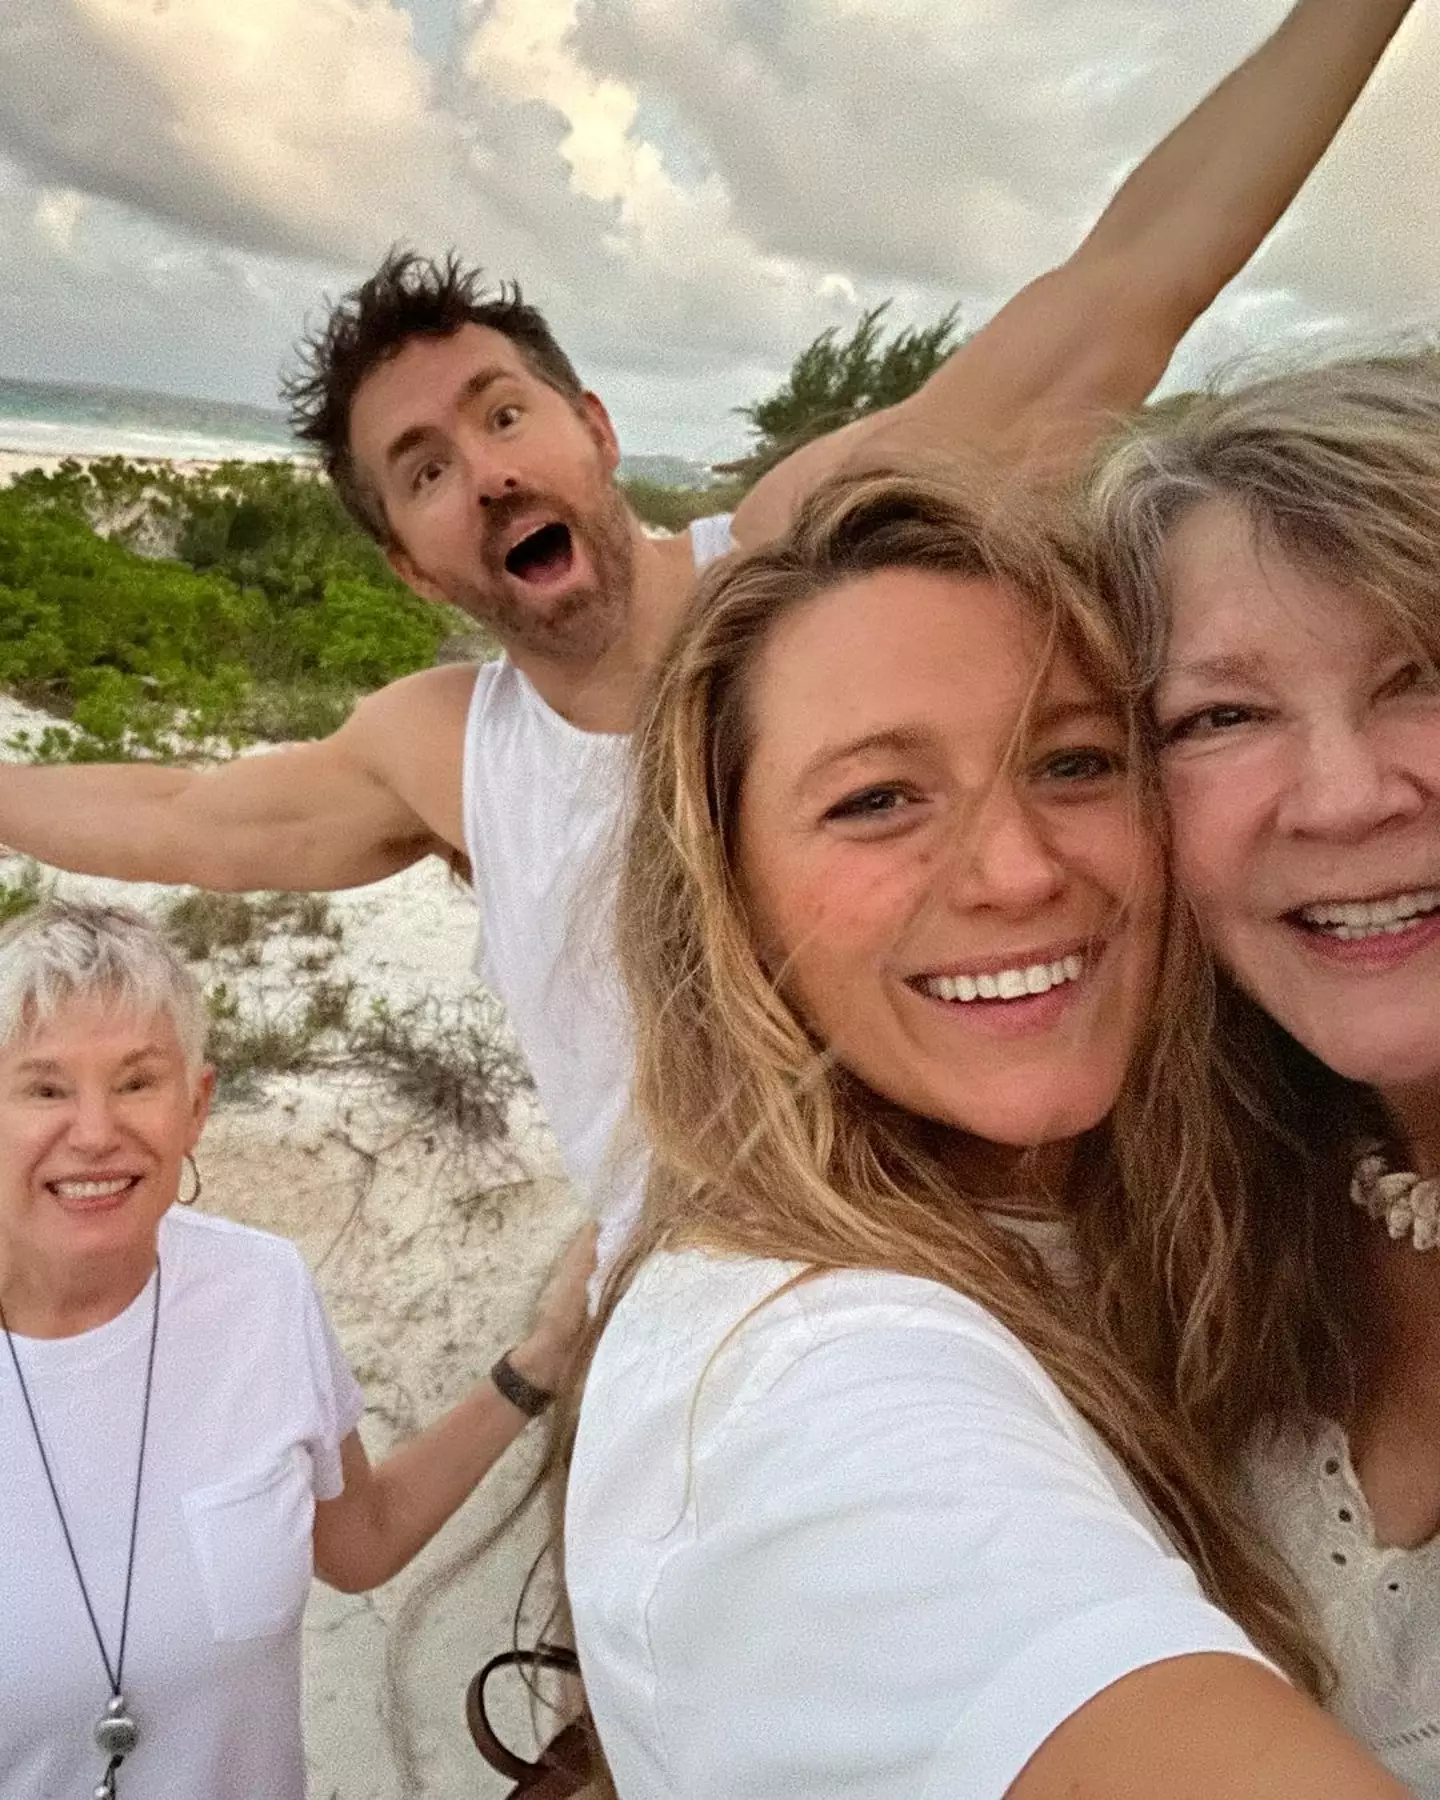 Blake Lively had a beach getaway with her husband Ryan and their mums.